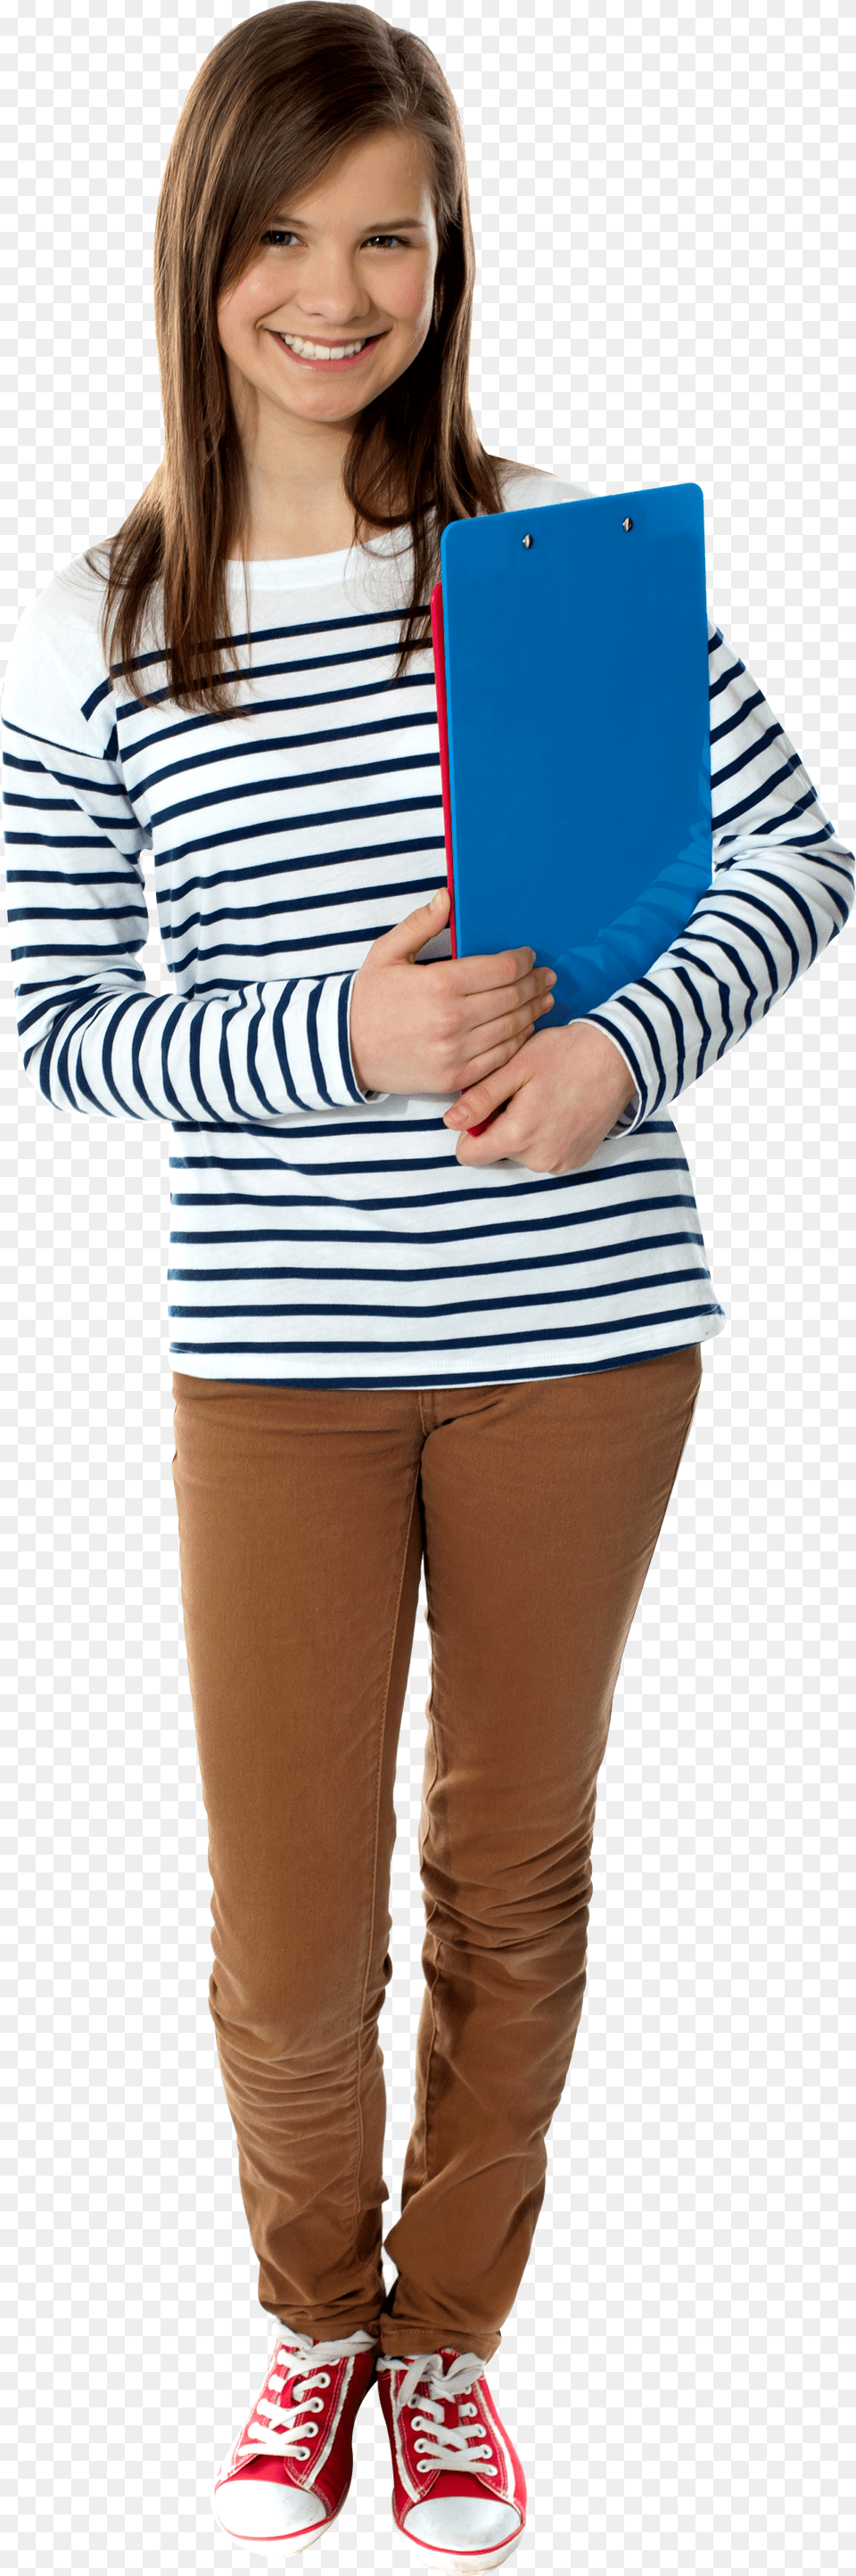 Student In Format Free Transparent Png